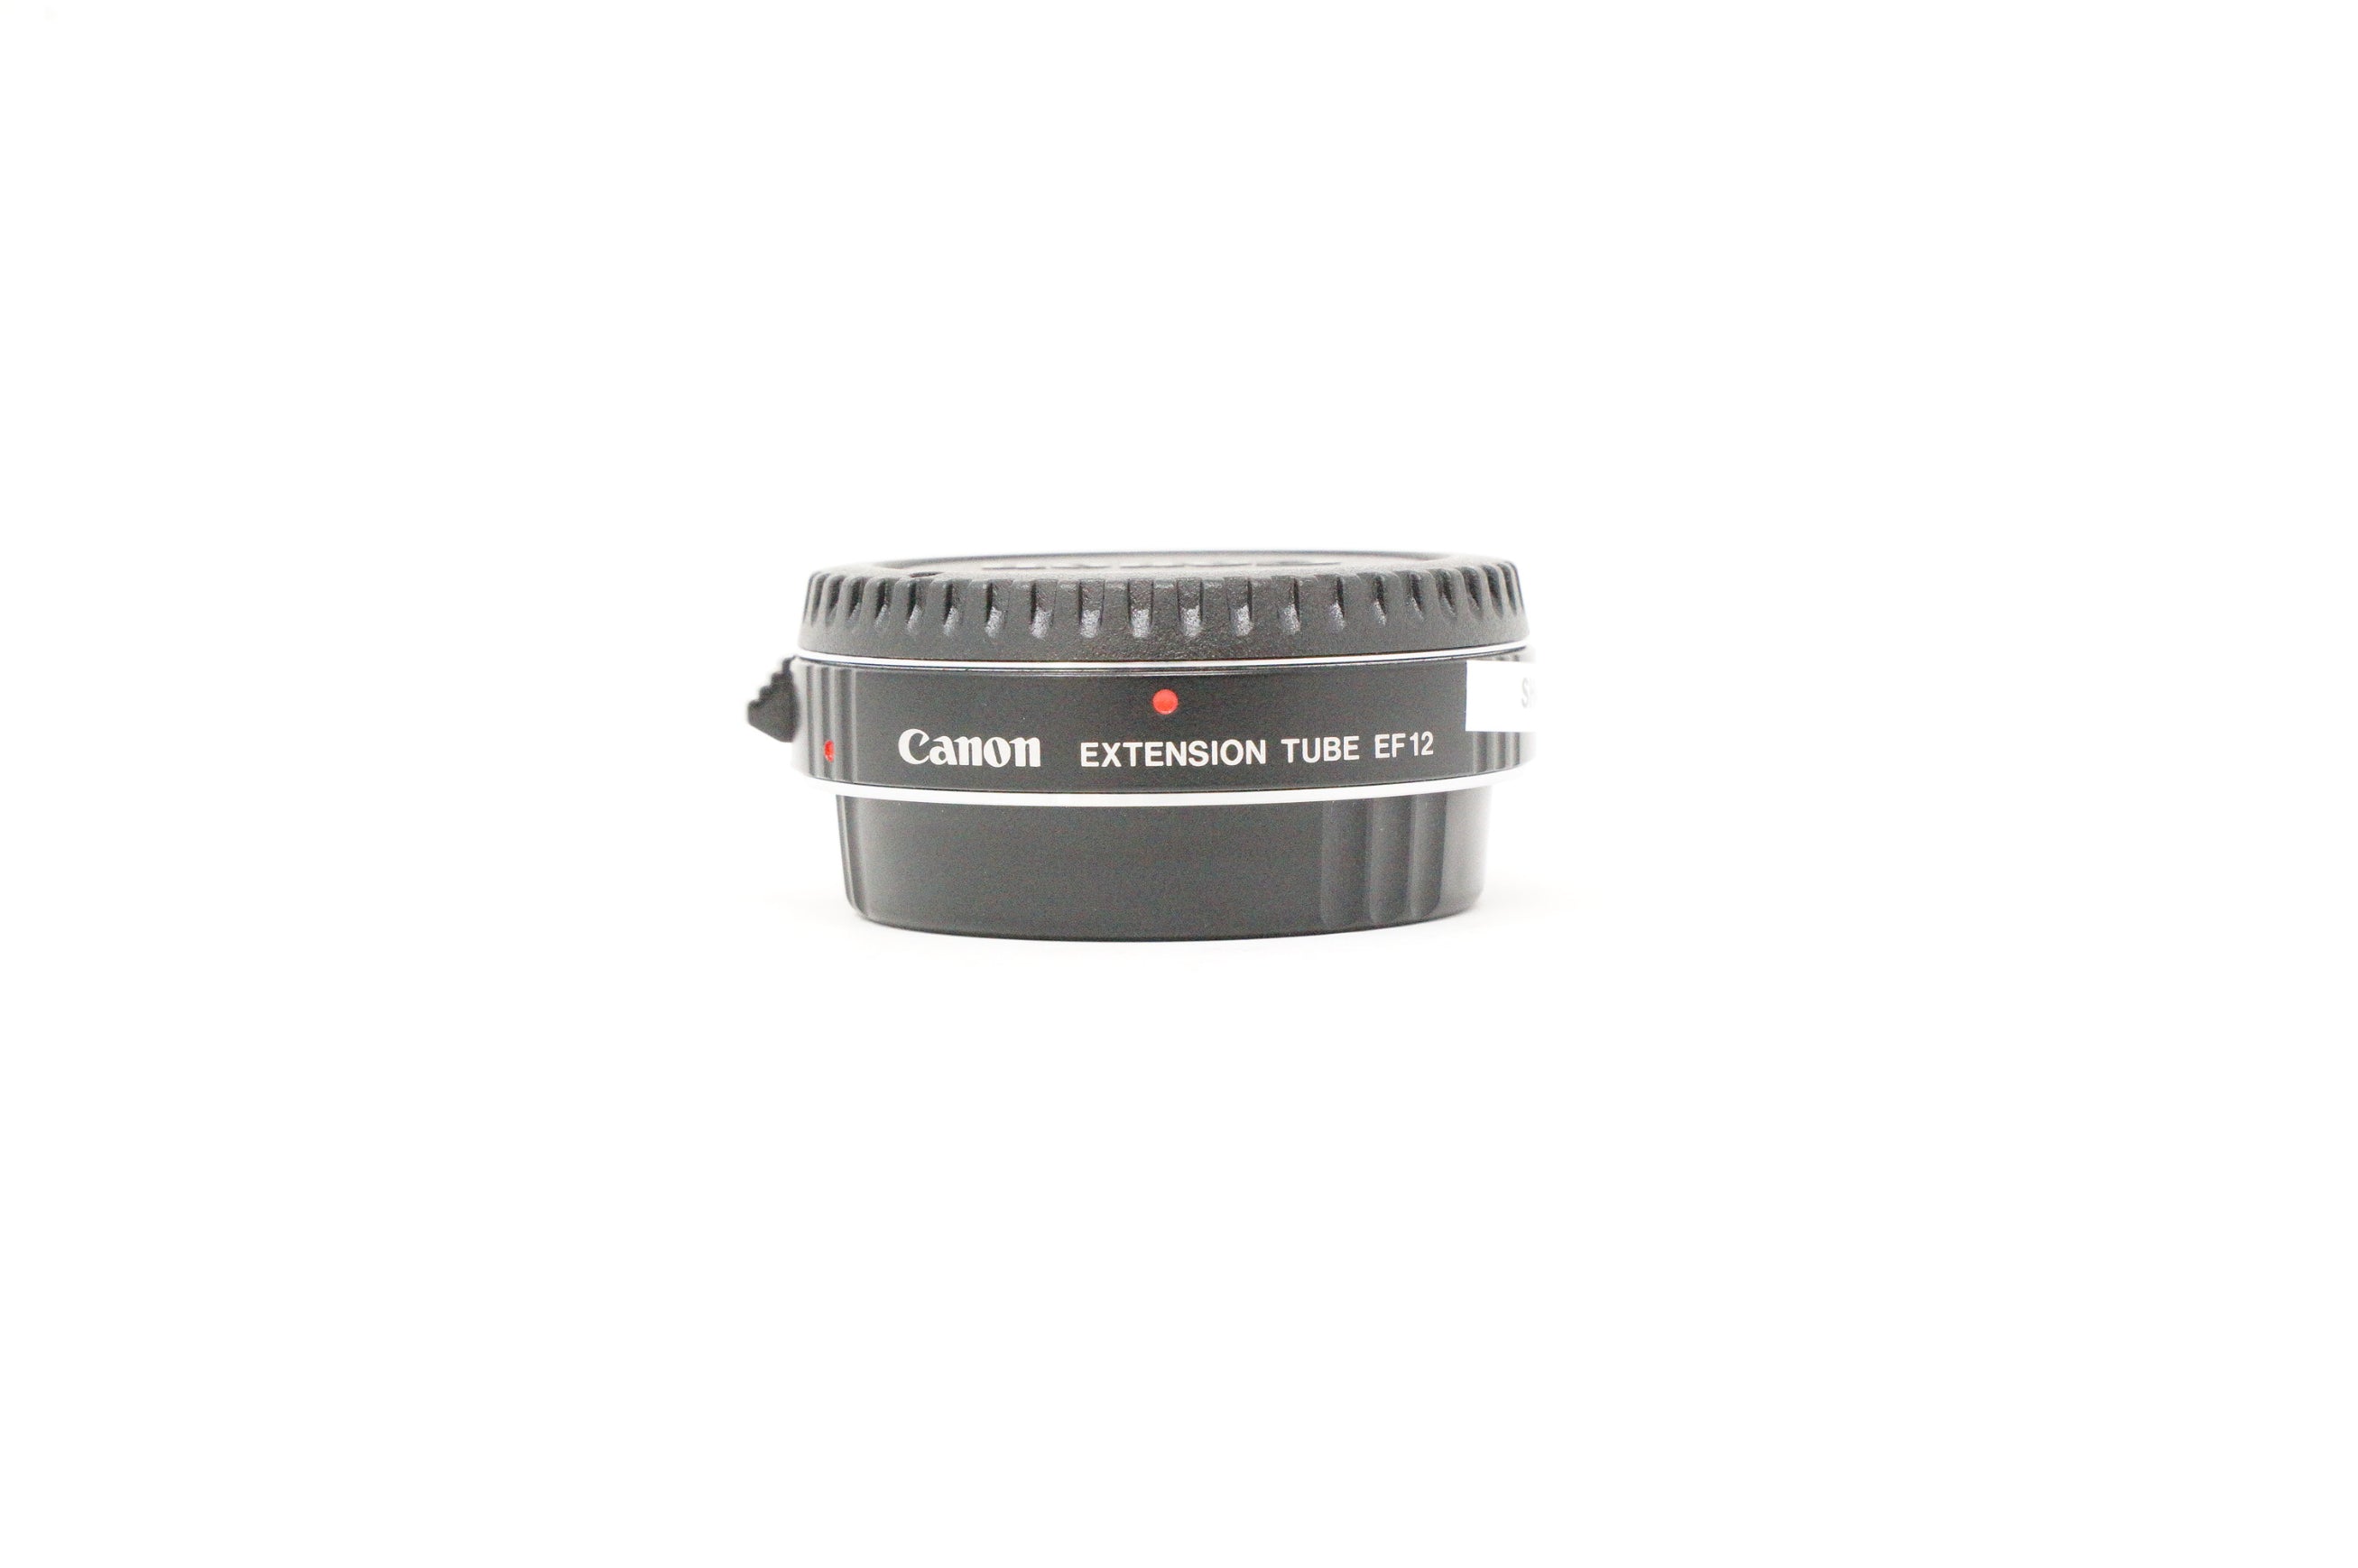 Used Canon Extension Tube EF12 for macro In Canon EF fit